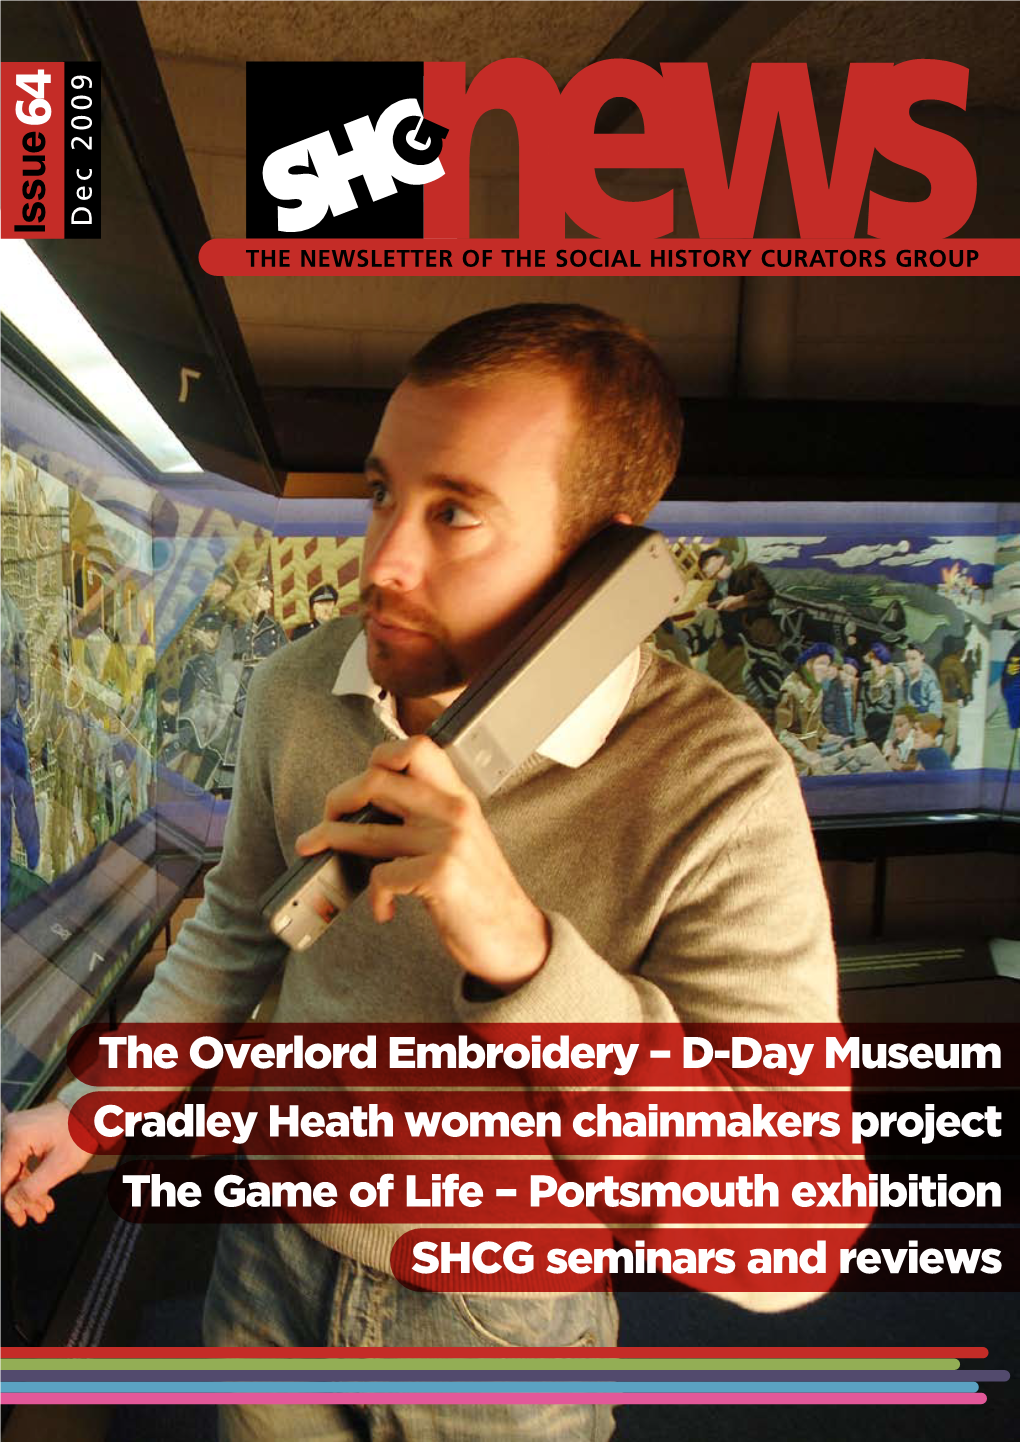 The Overlord Embroidery – D-Day Museum Cradley Heath Women